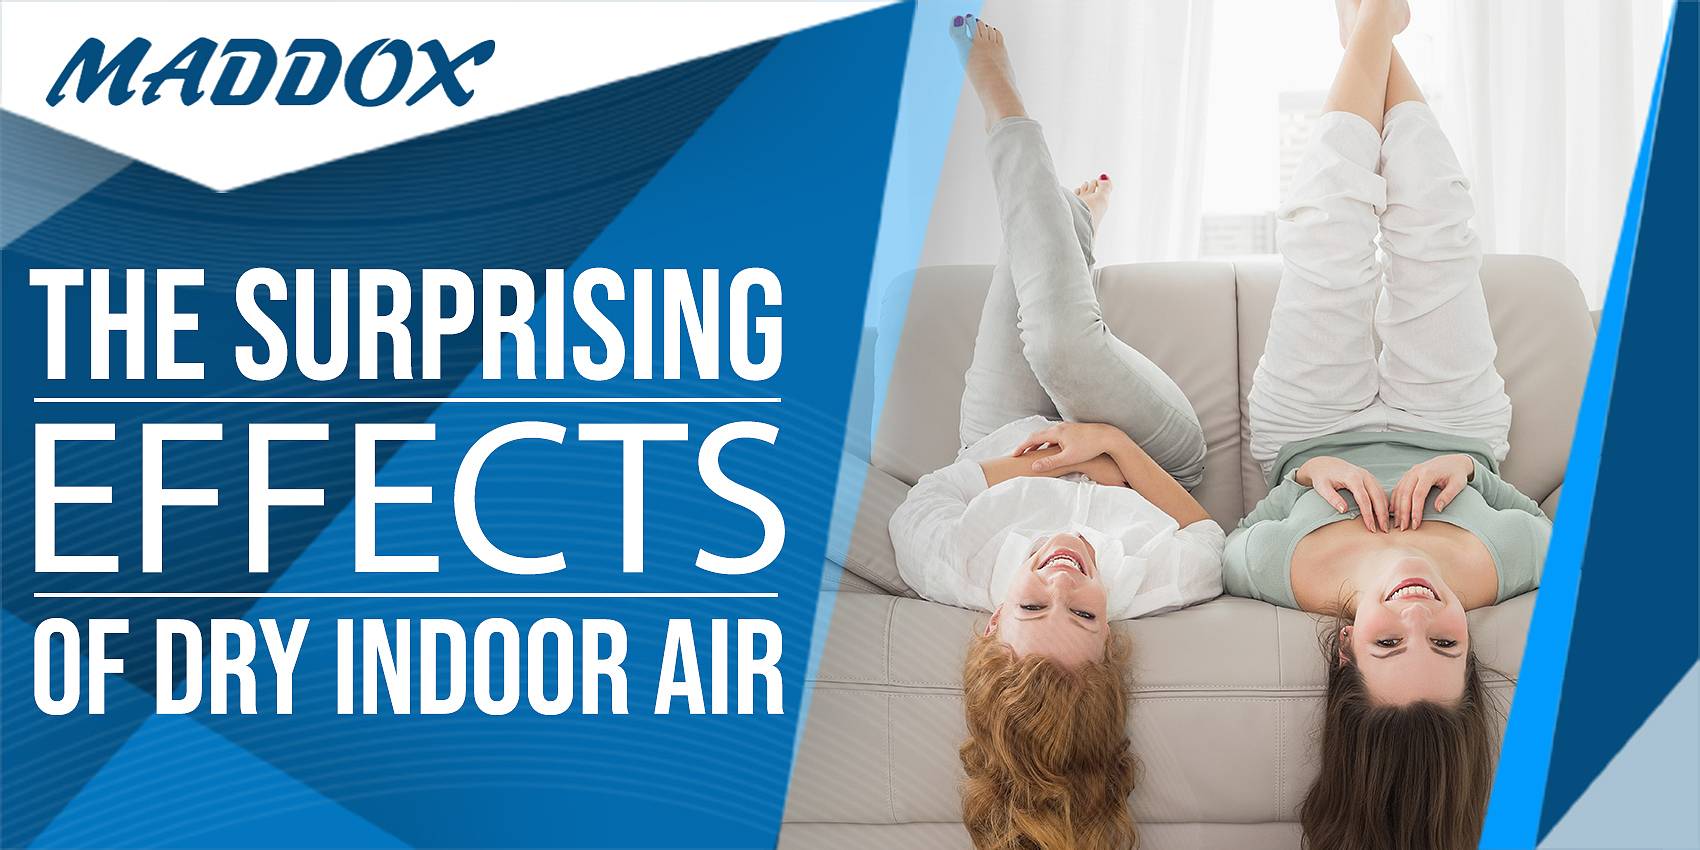 The Surprising Effects of Dry Indoor Air